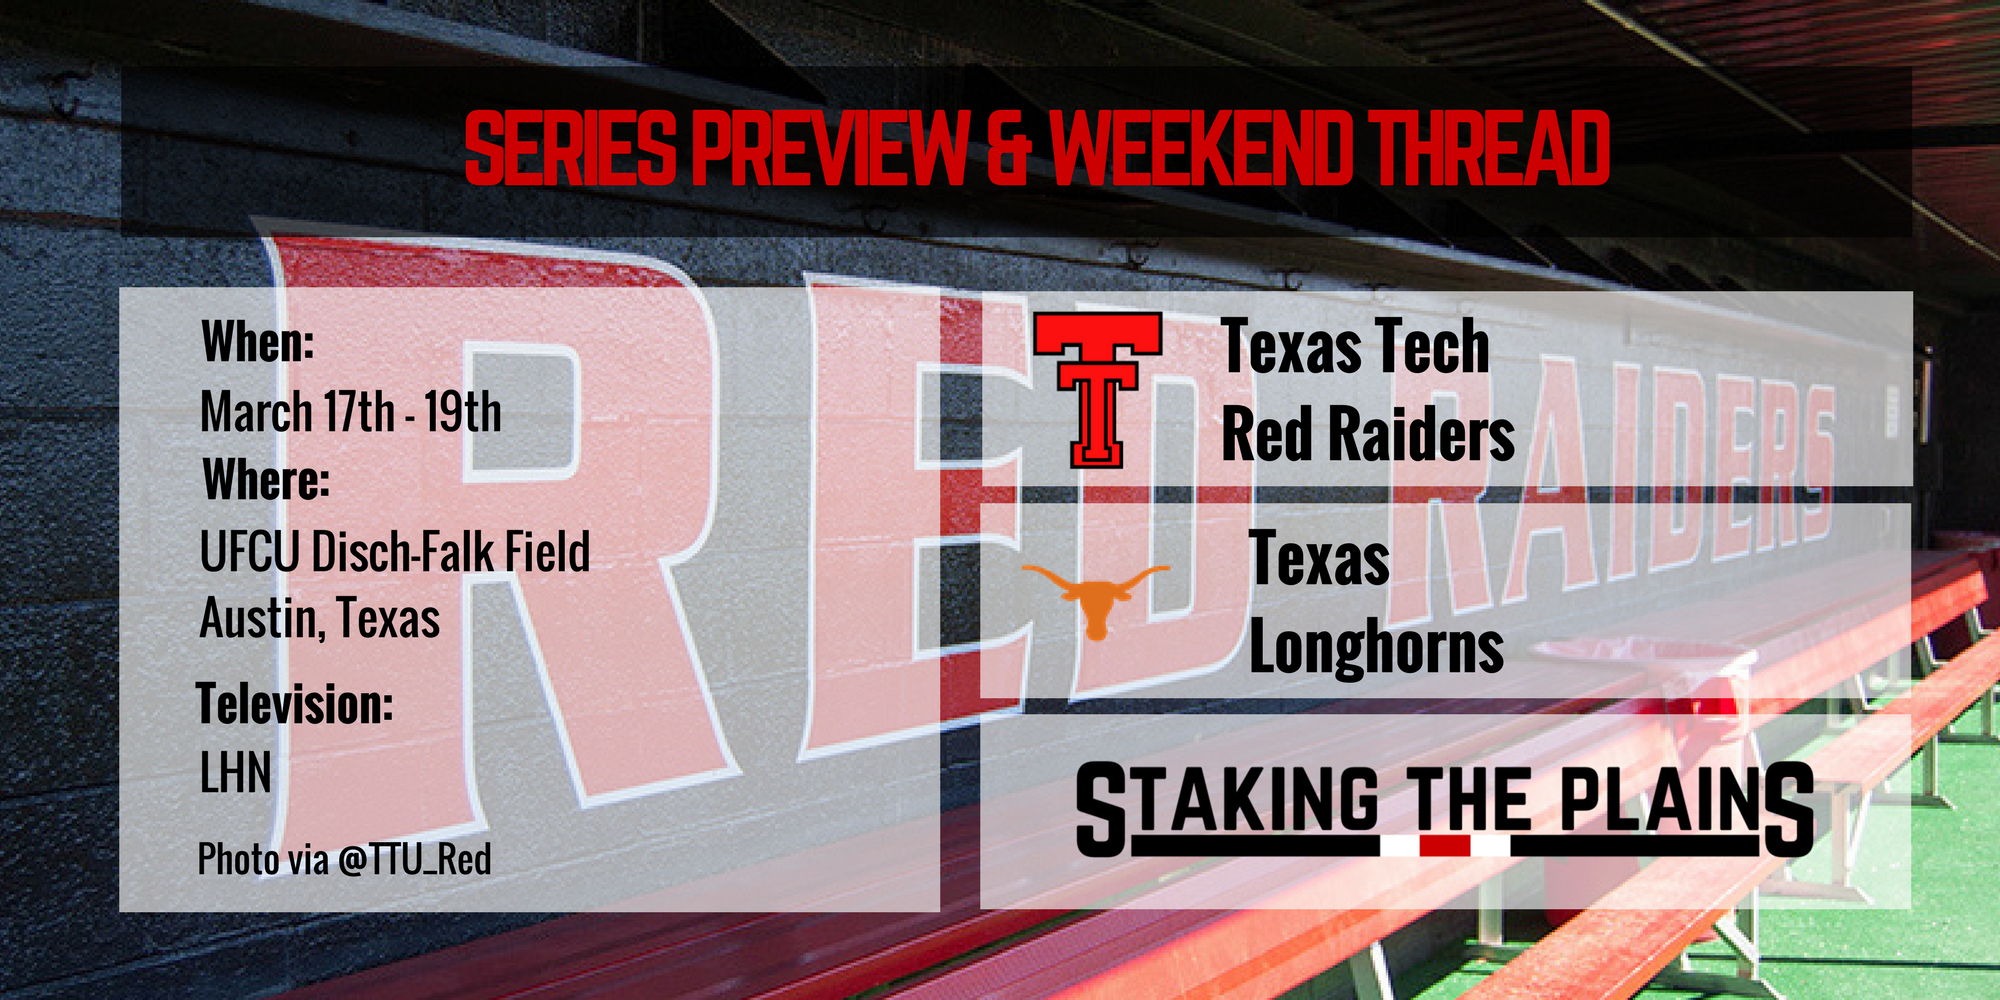 Series Preview and Weekend Thread: Texas Tech vs. Texas